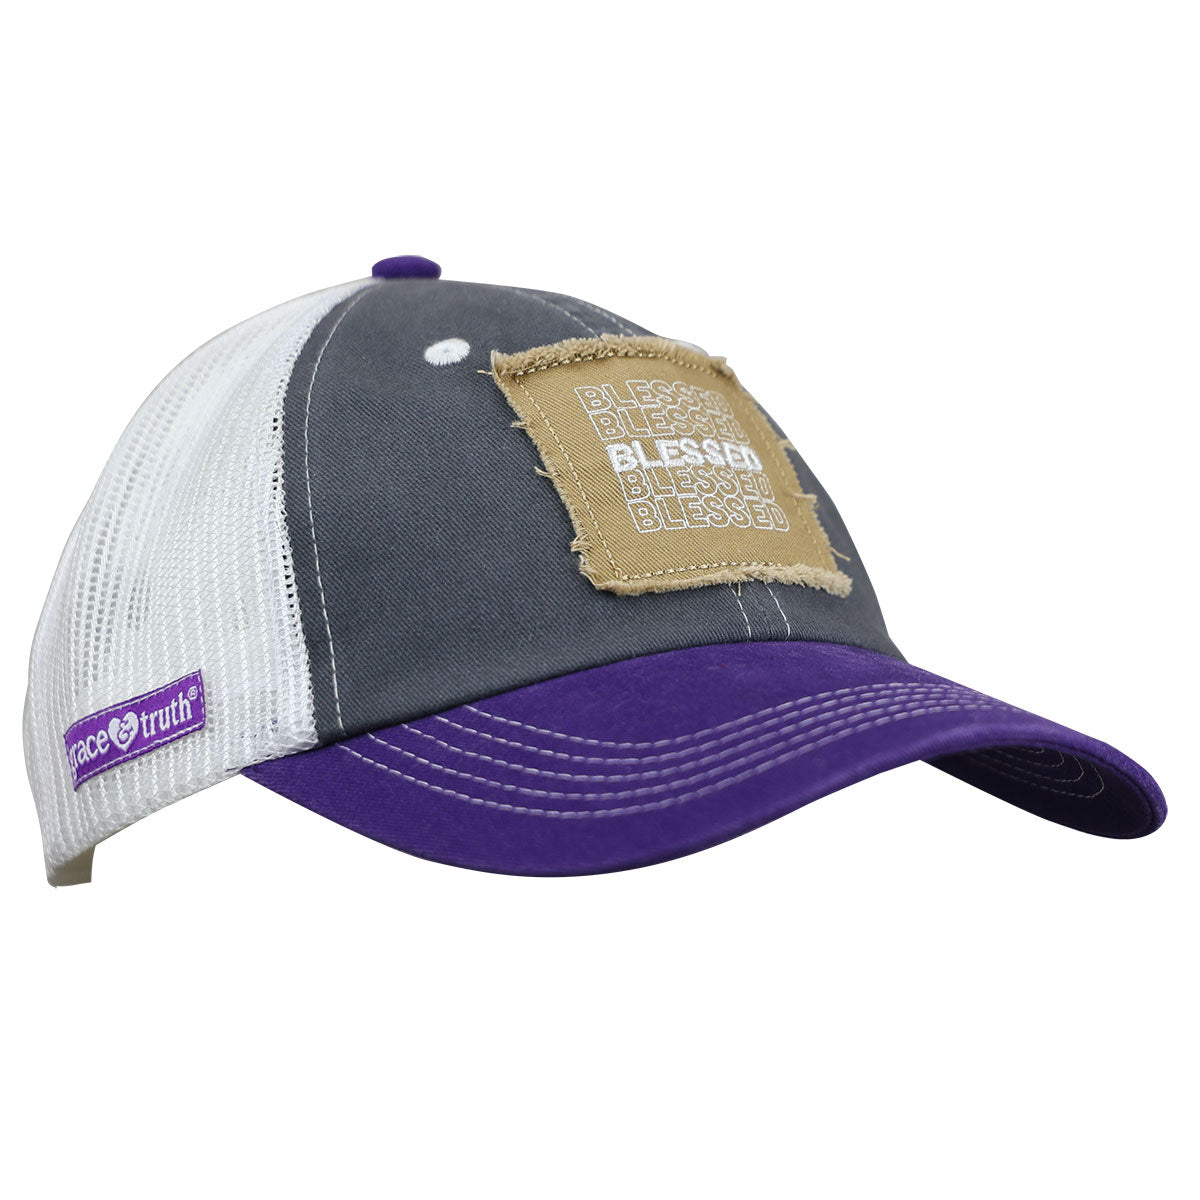 grace & truth Womens Cap Blessed Patch